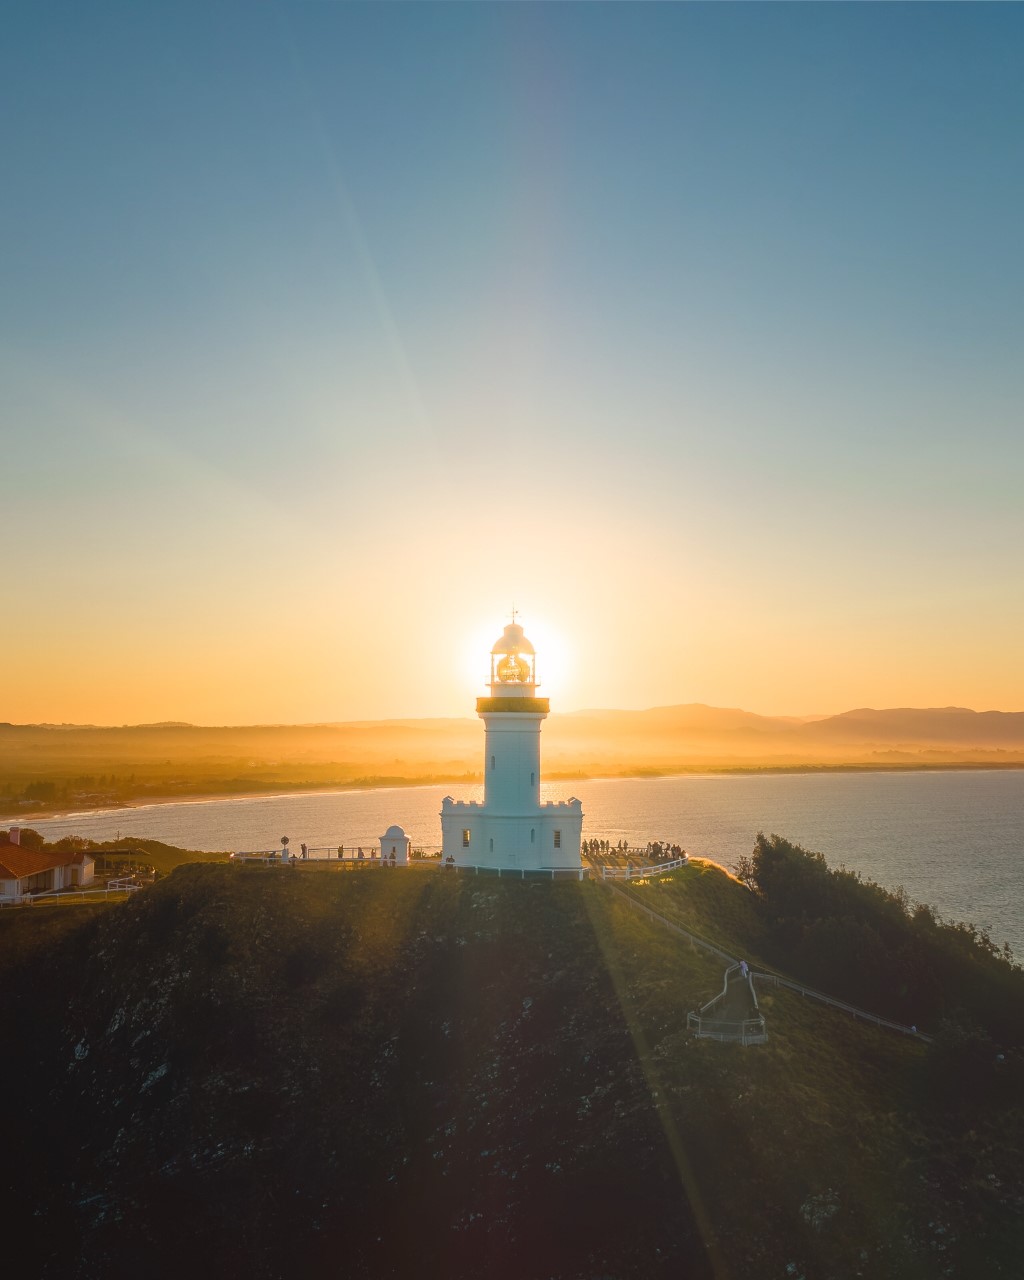 Add lens flares to your drone photos when you shoot against the sun for that magical effect